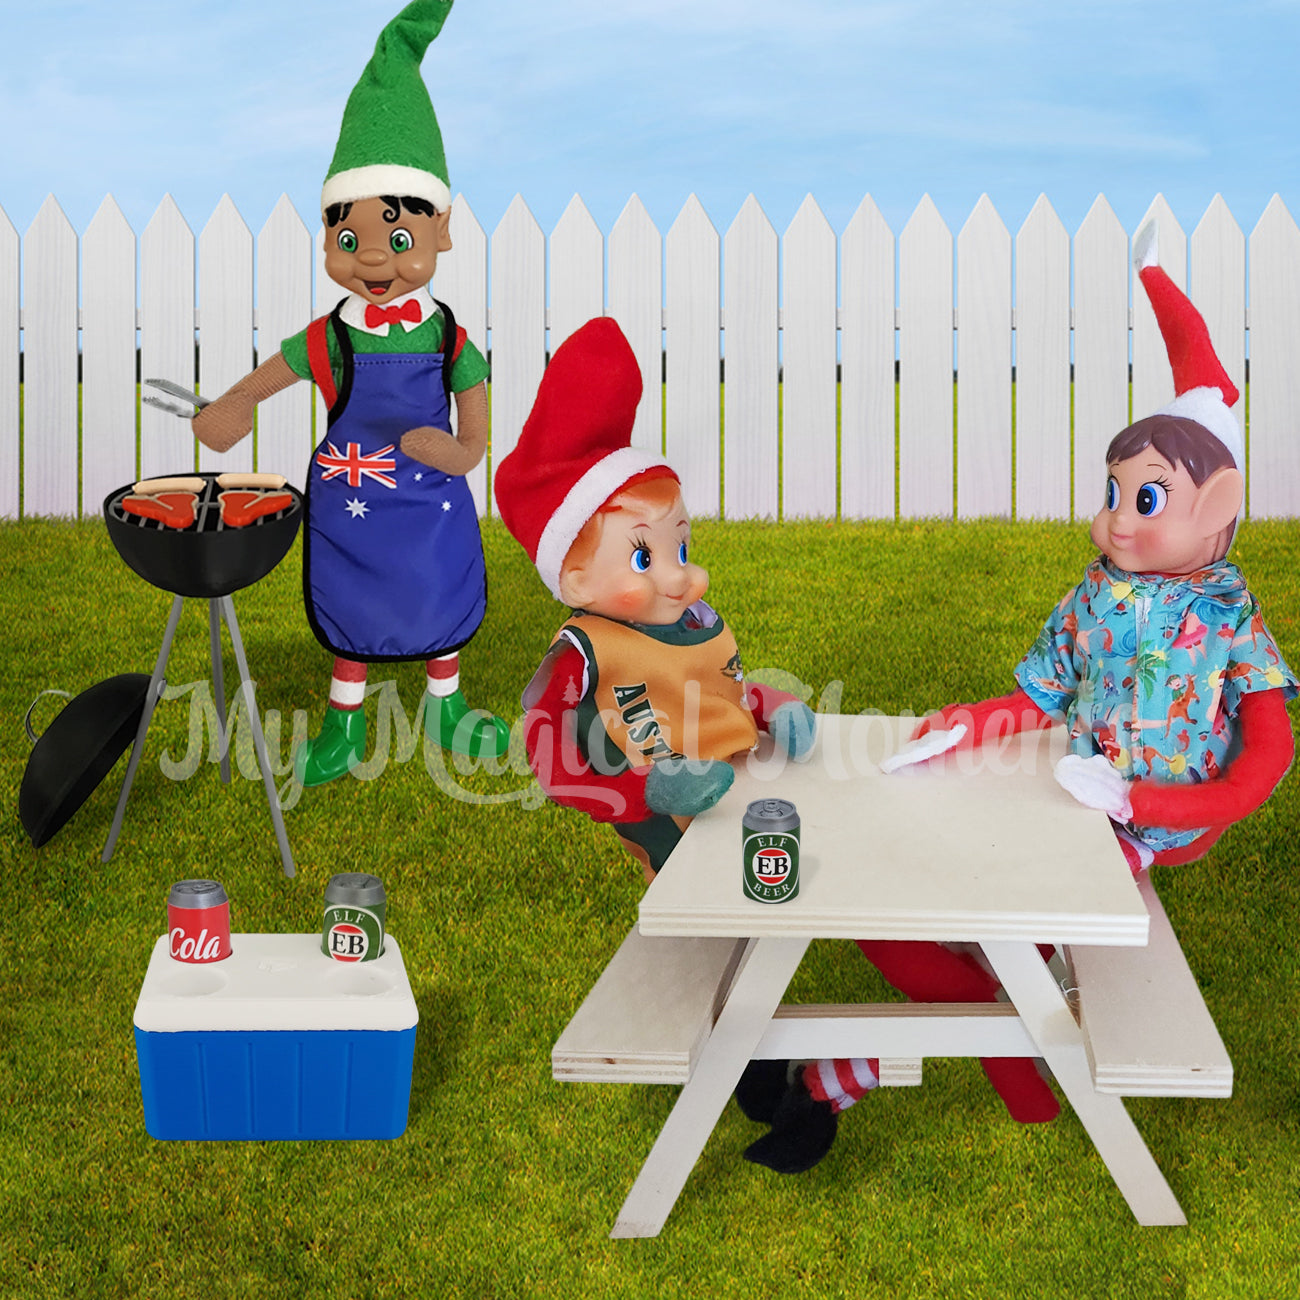 Elves having a bbq sitting at a picnic table with beer and a esky. One elf is cooking meat on the barbeque